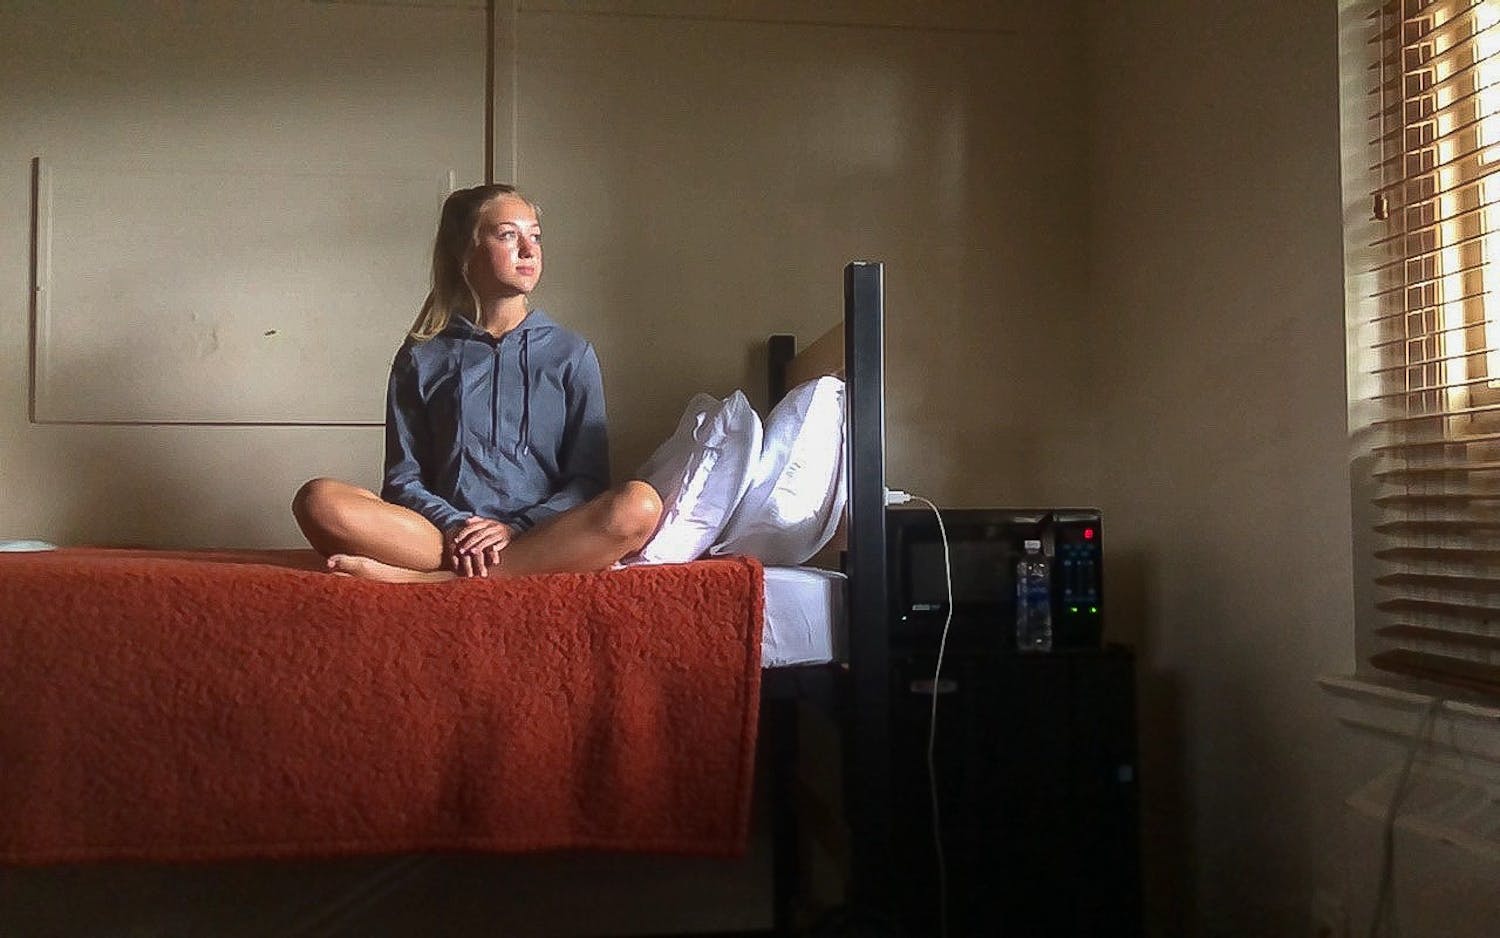 'It was just desolate': Life inside UNC's quarantine and isolation dorms